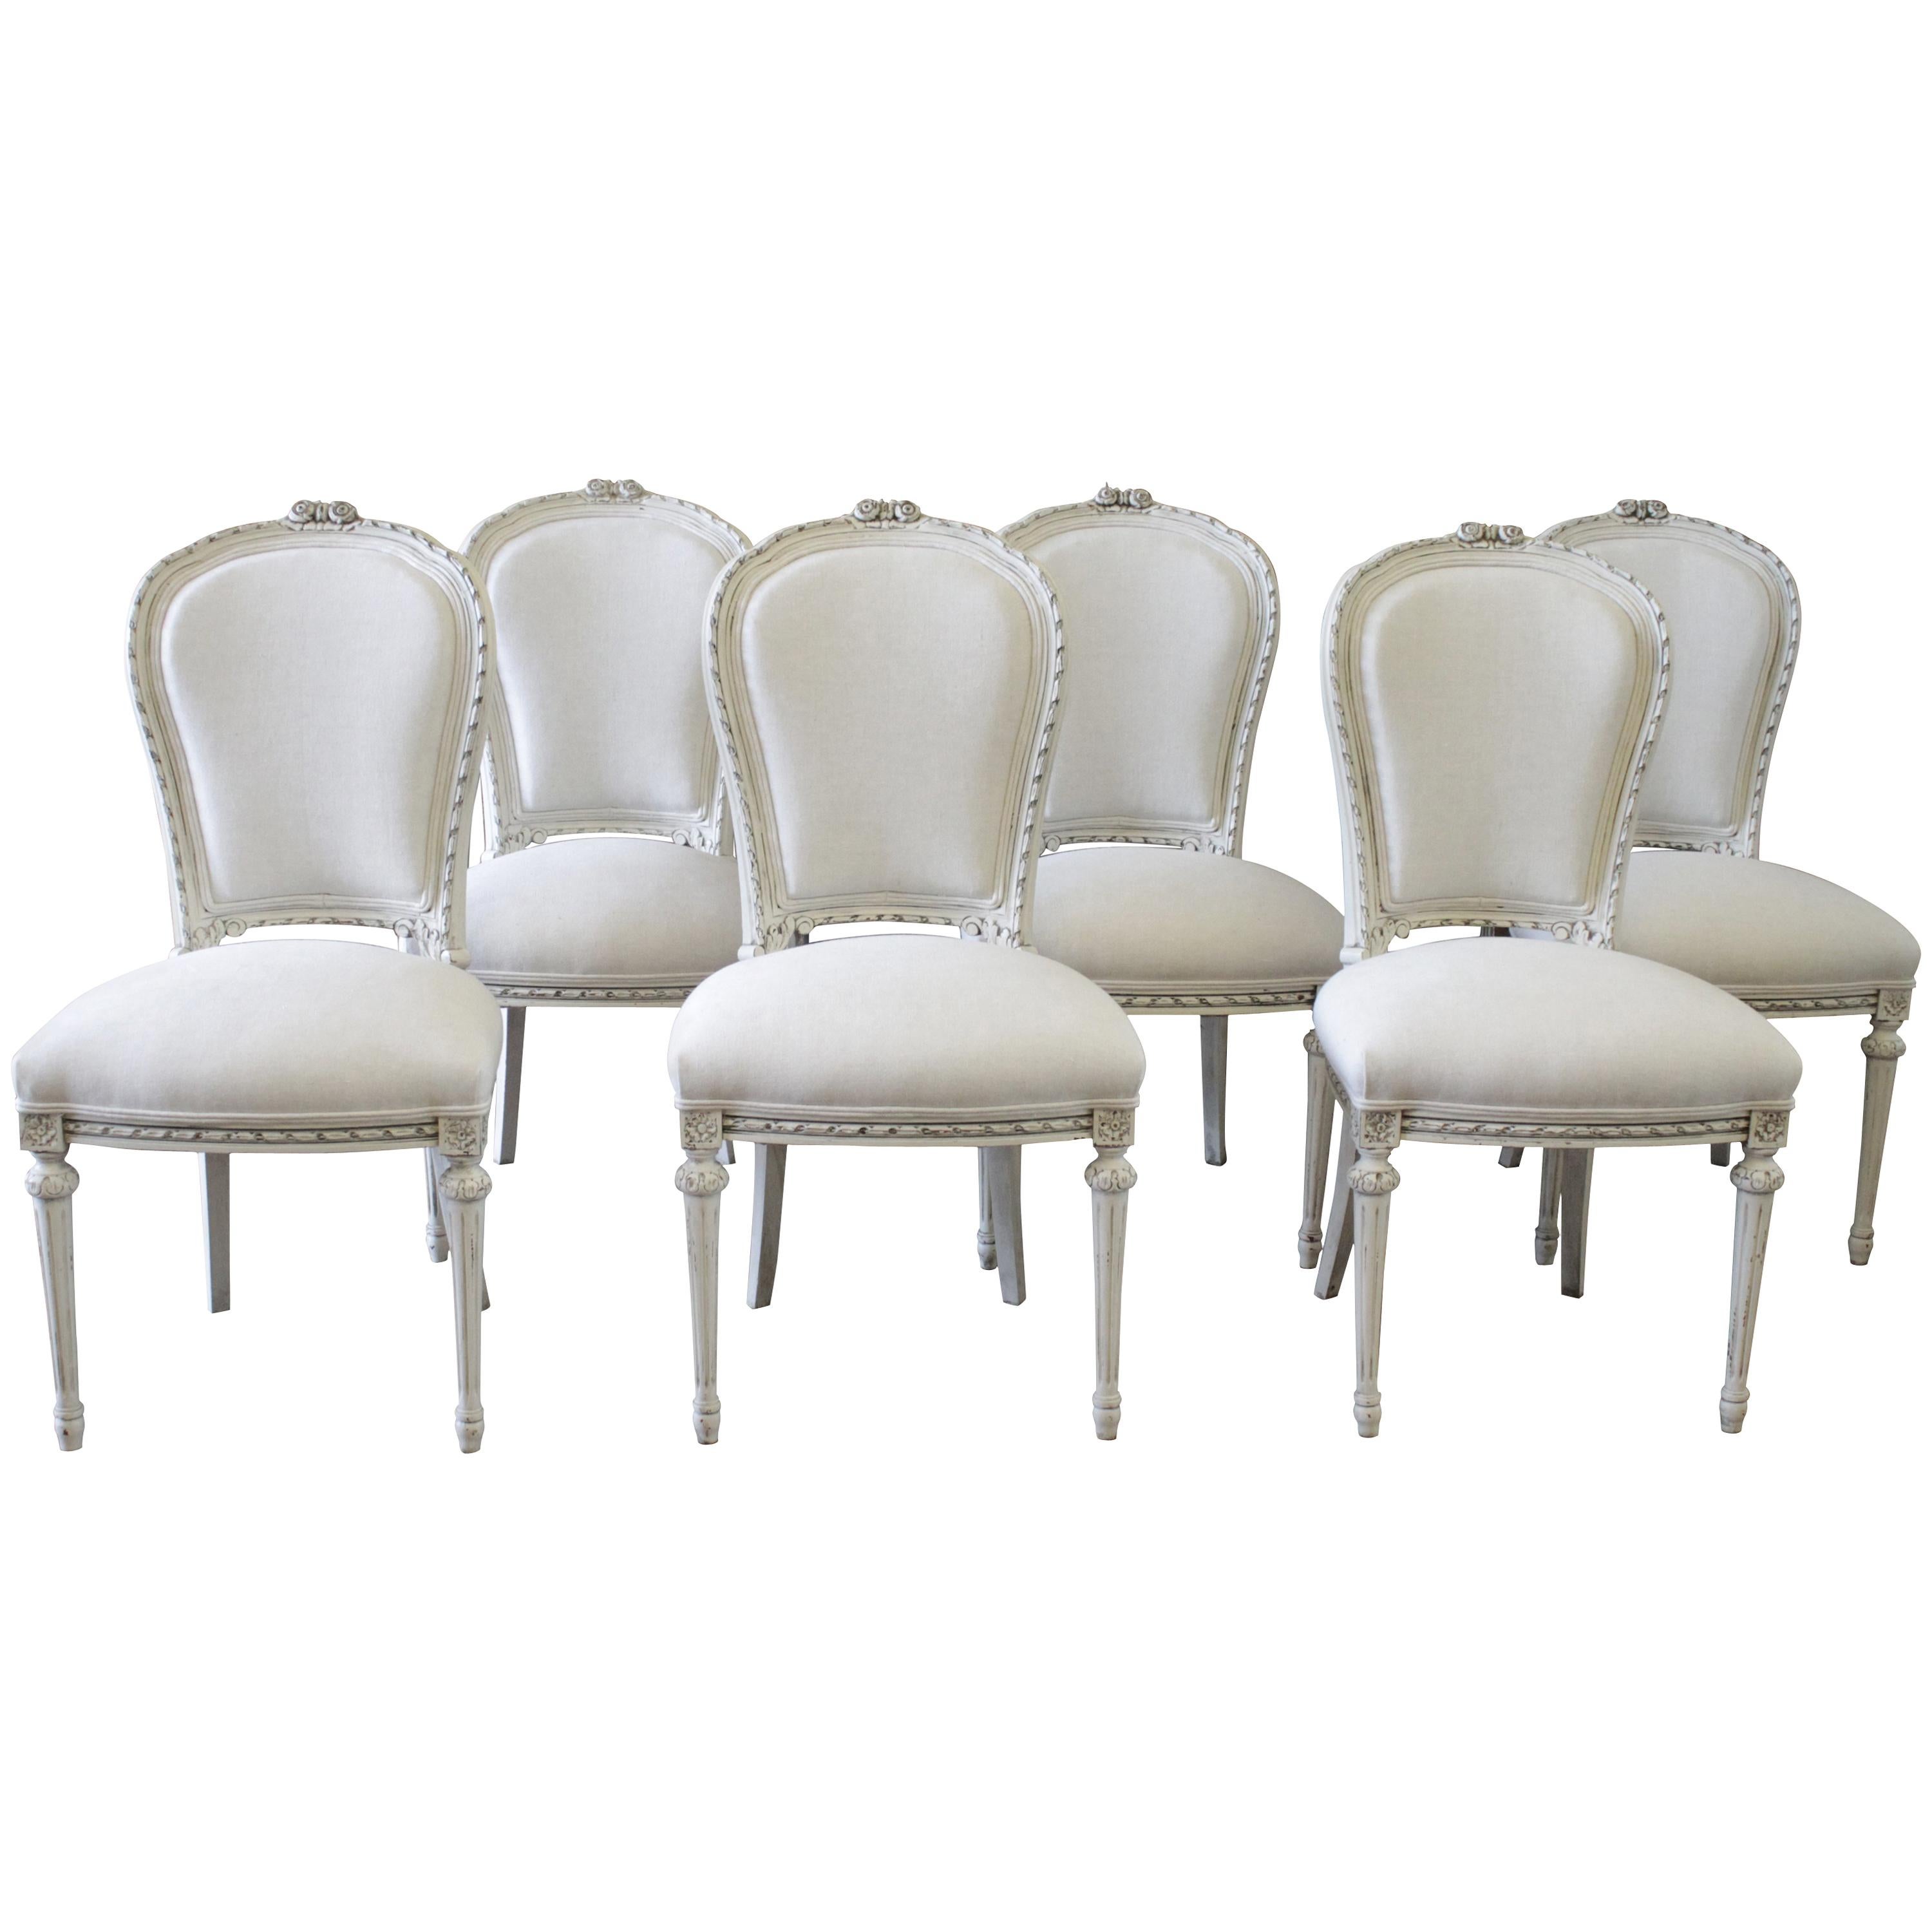 20th Century Louis XVI Style Painted Dining Chairs with Linen Upholstery